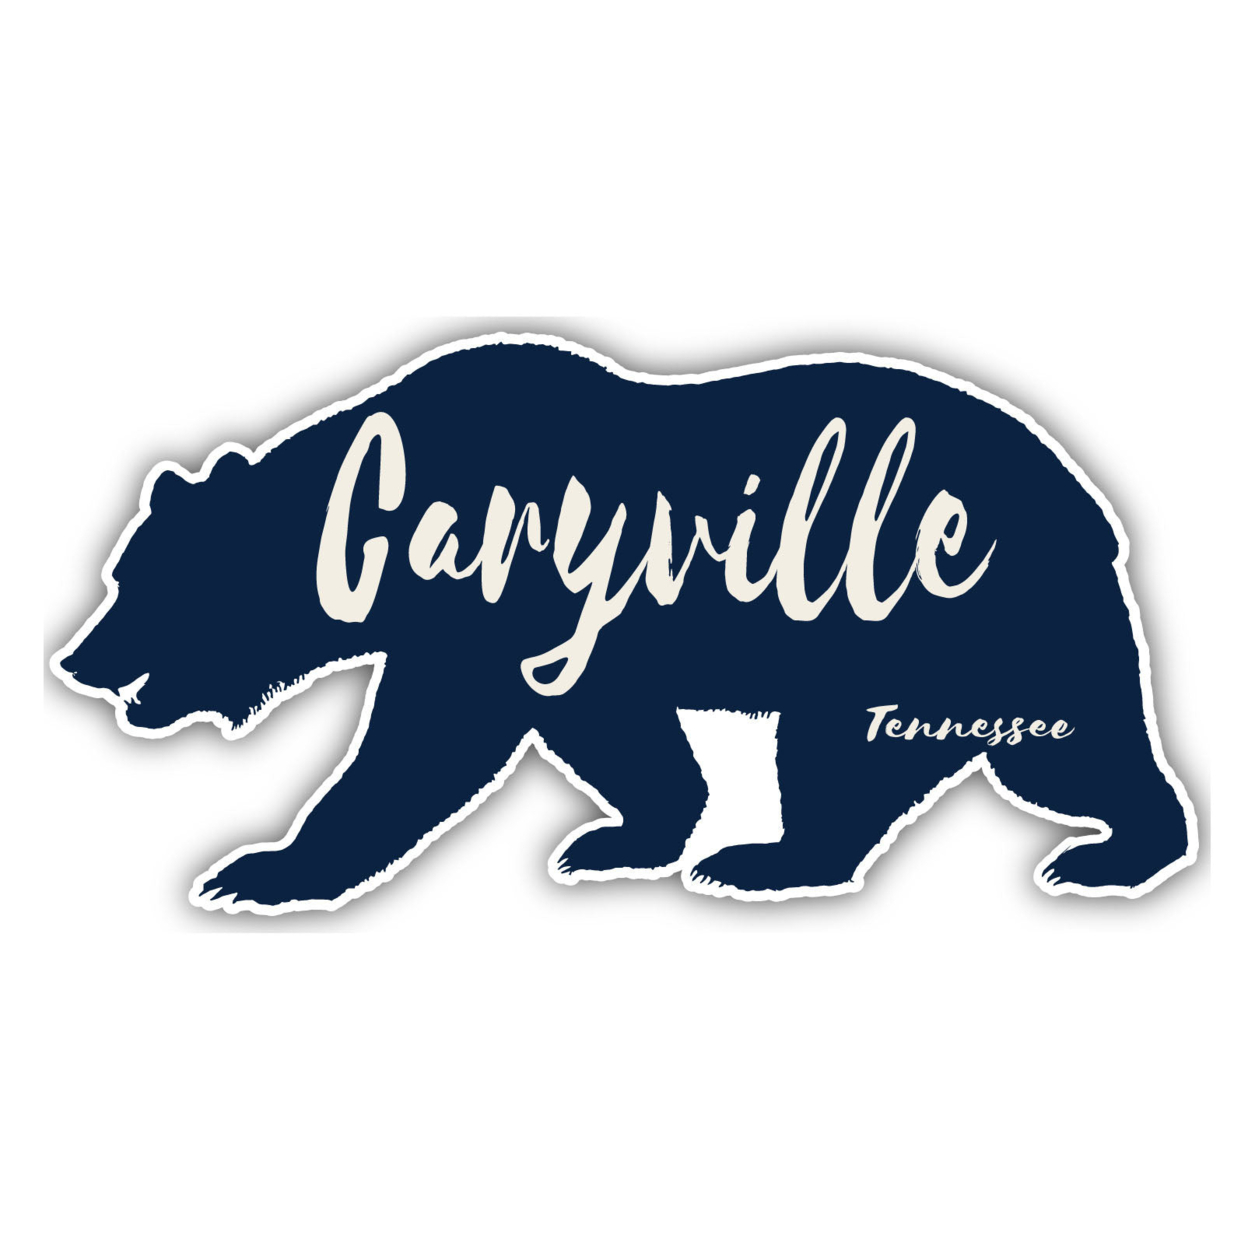 Caryville Tennessee Souvenir Decorative Stickers (Choose Theme And Size) - Single Unit, 8-Inch, Camp Life